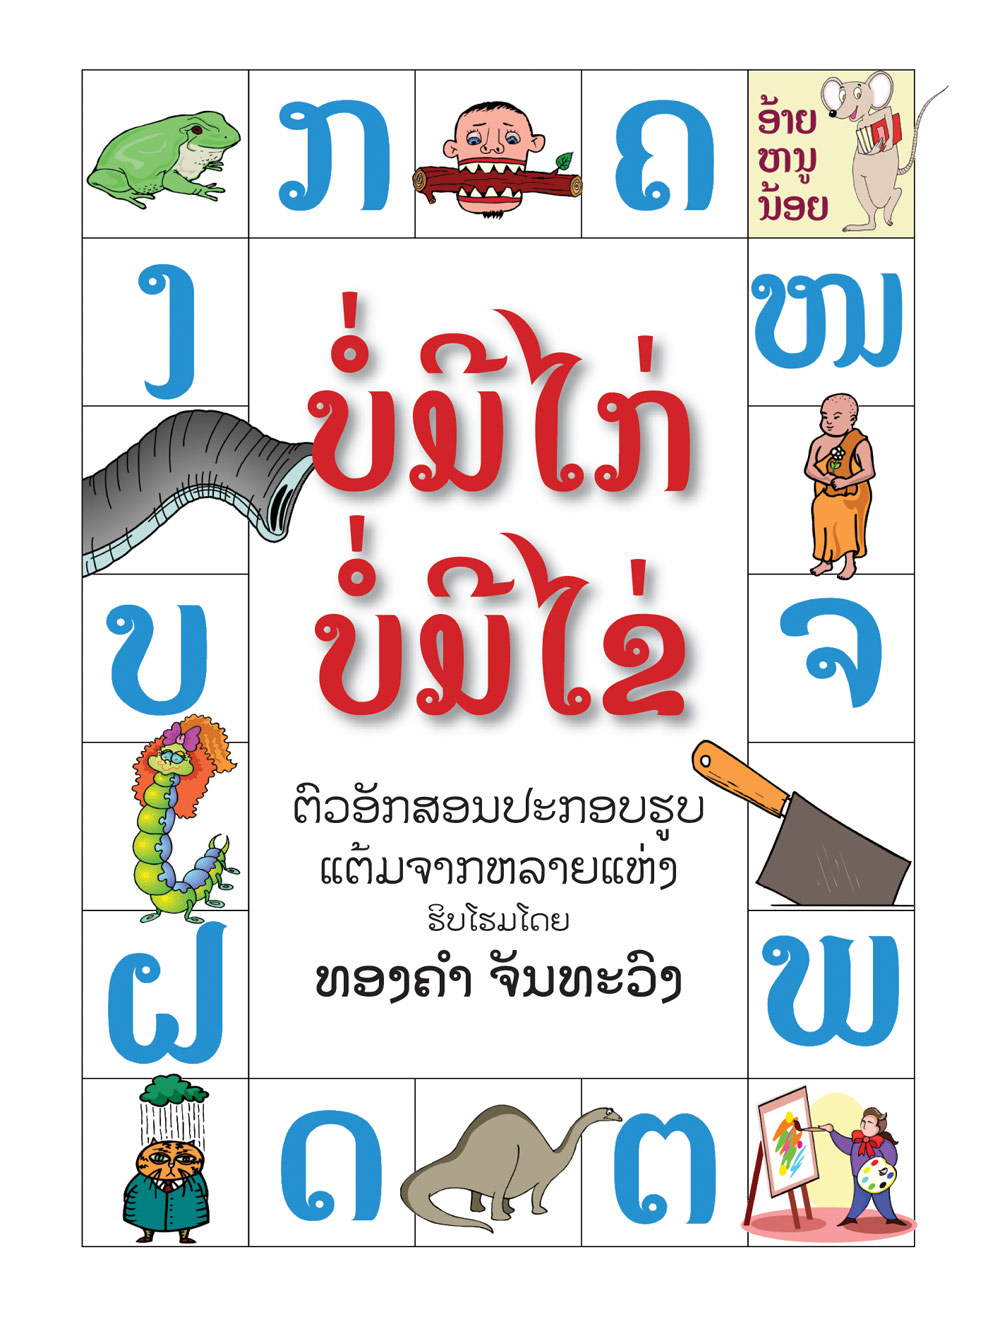 No Chickens, No Eggs large book cover, published in Lao and English